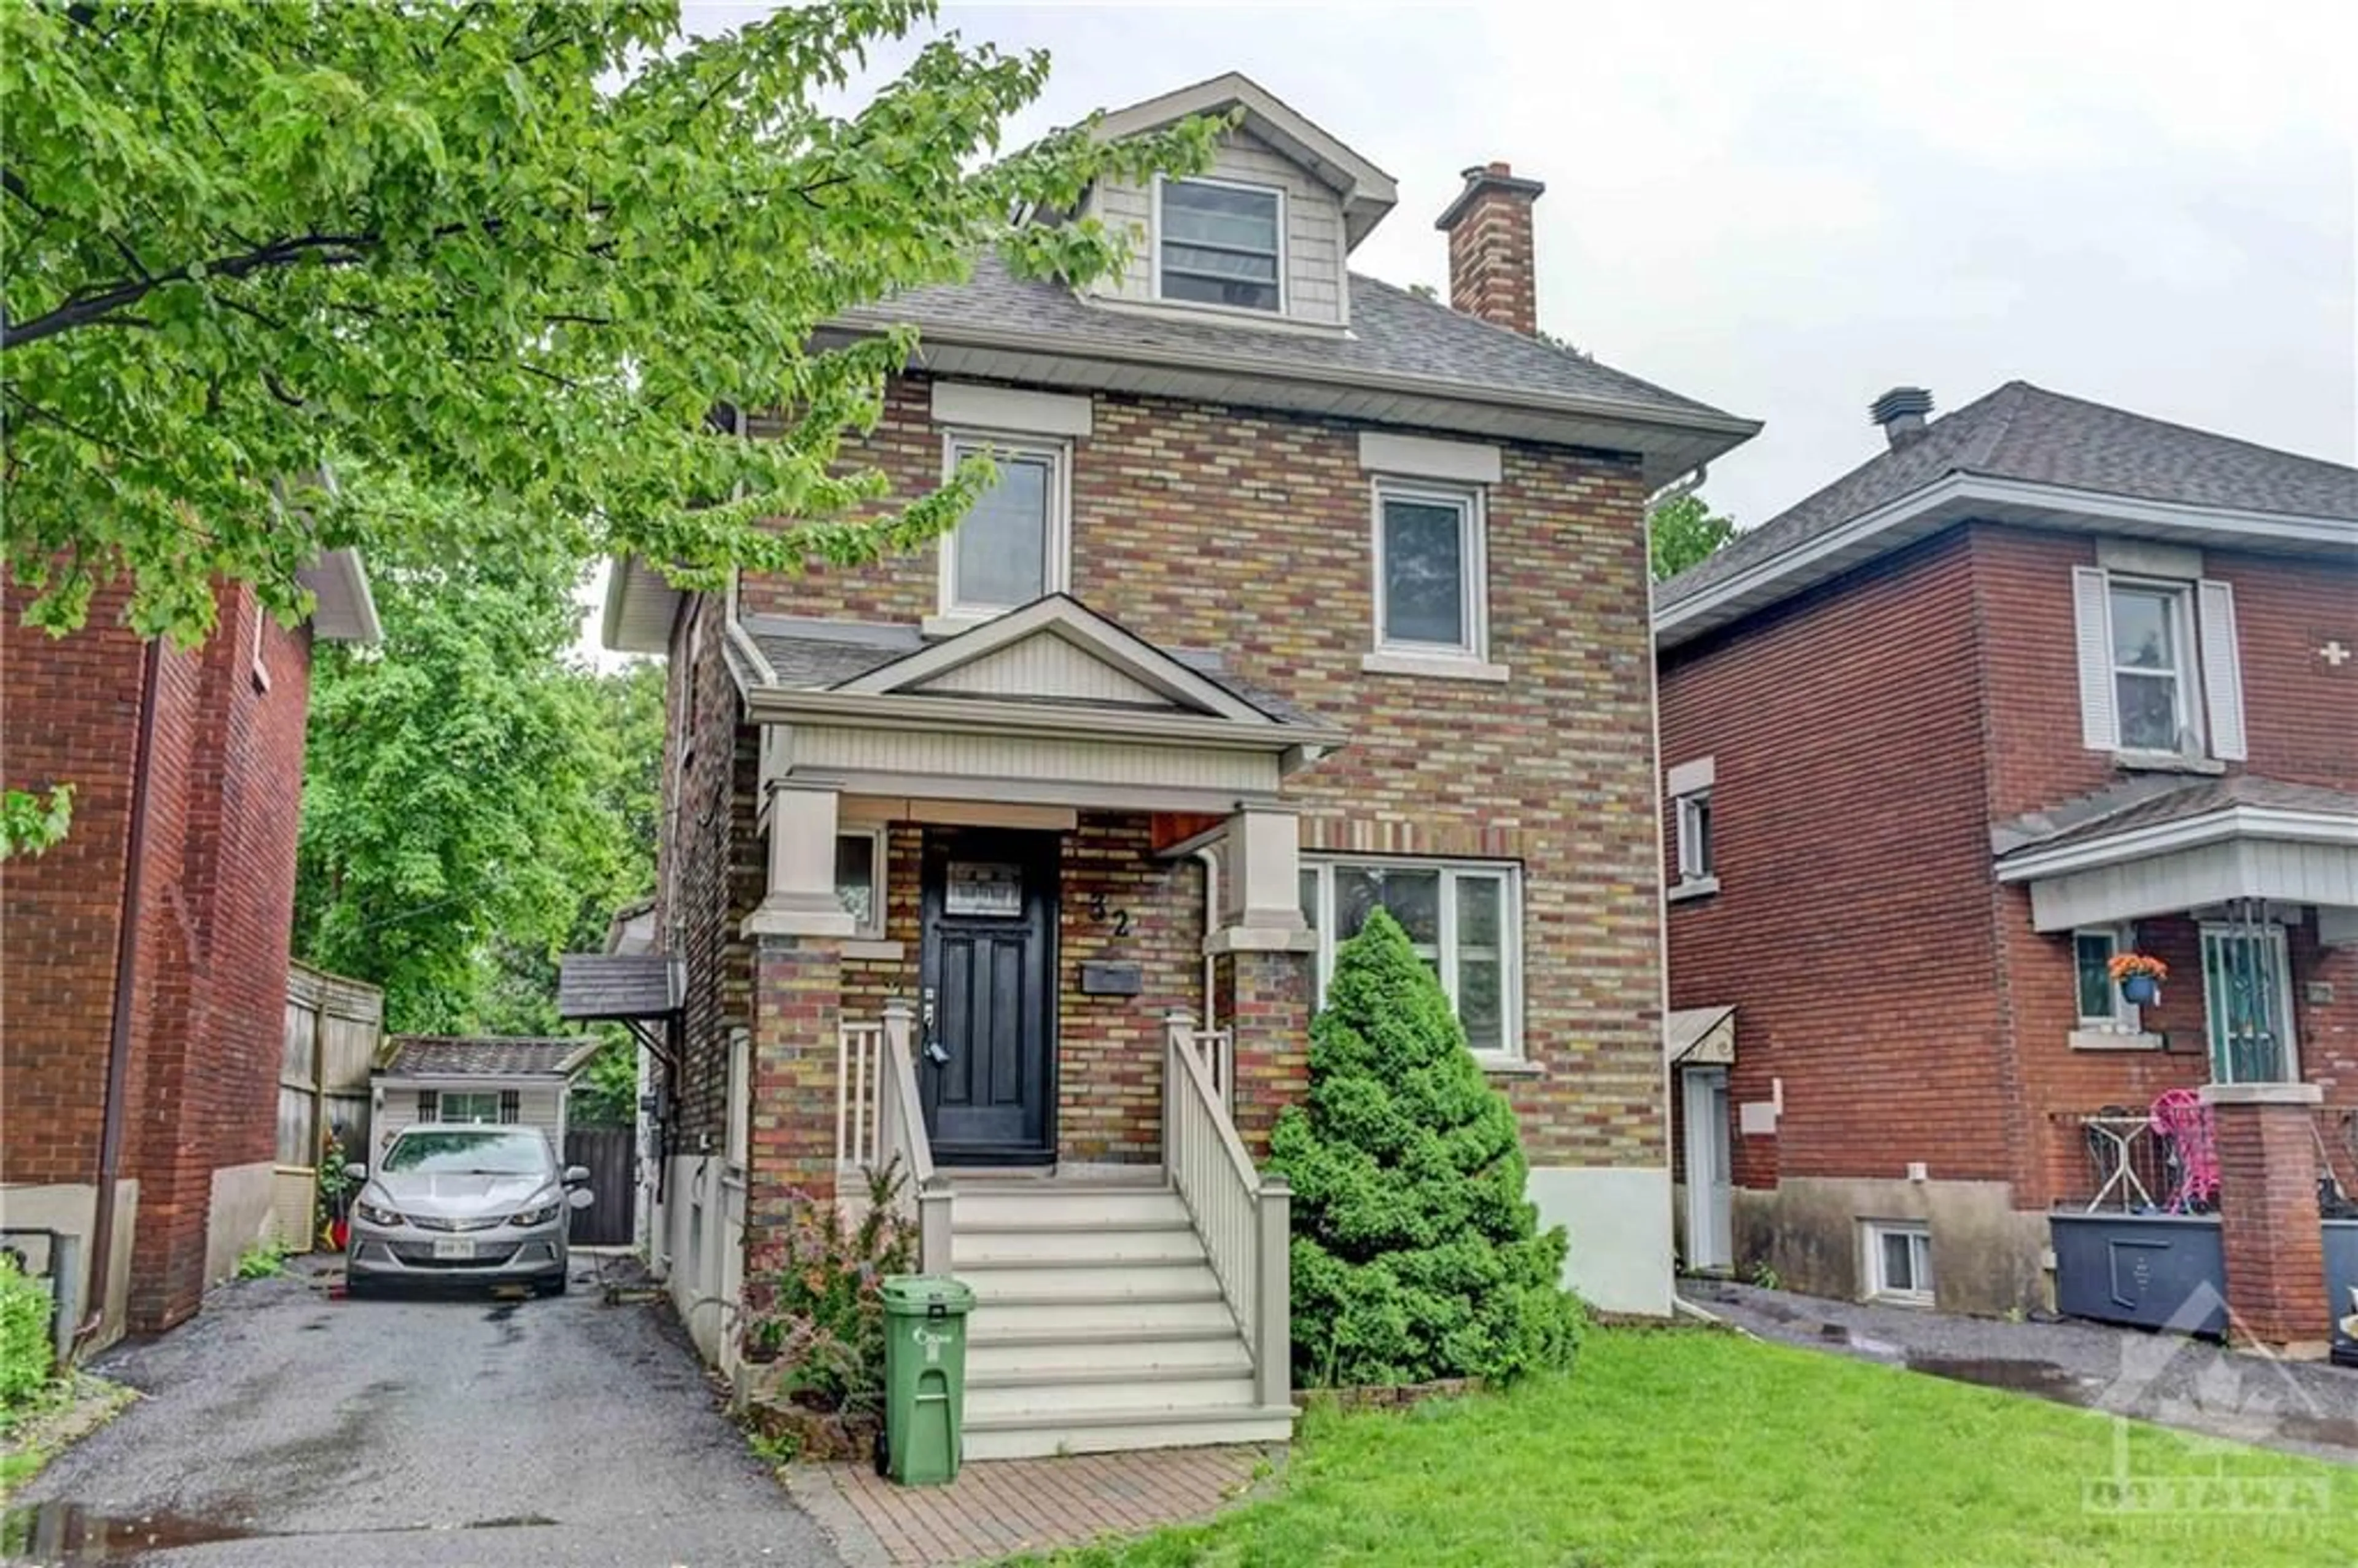 Home with brick exterior material for 32 GLENDALE Ave, Ottawa Ontario K1S 1W4